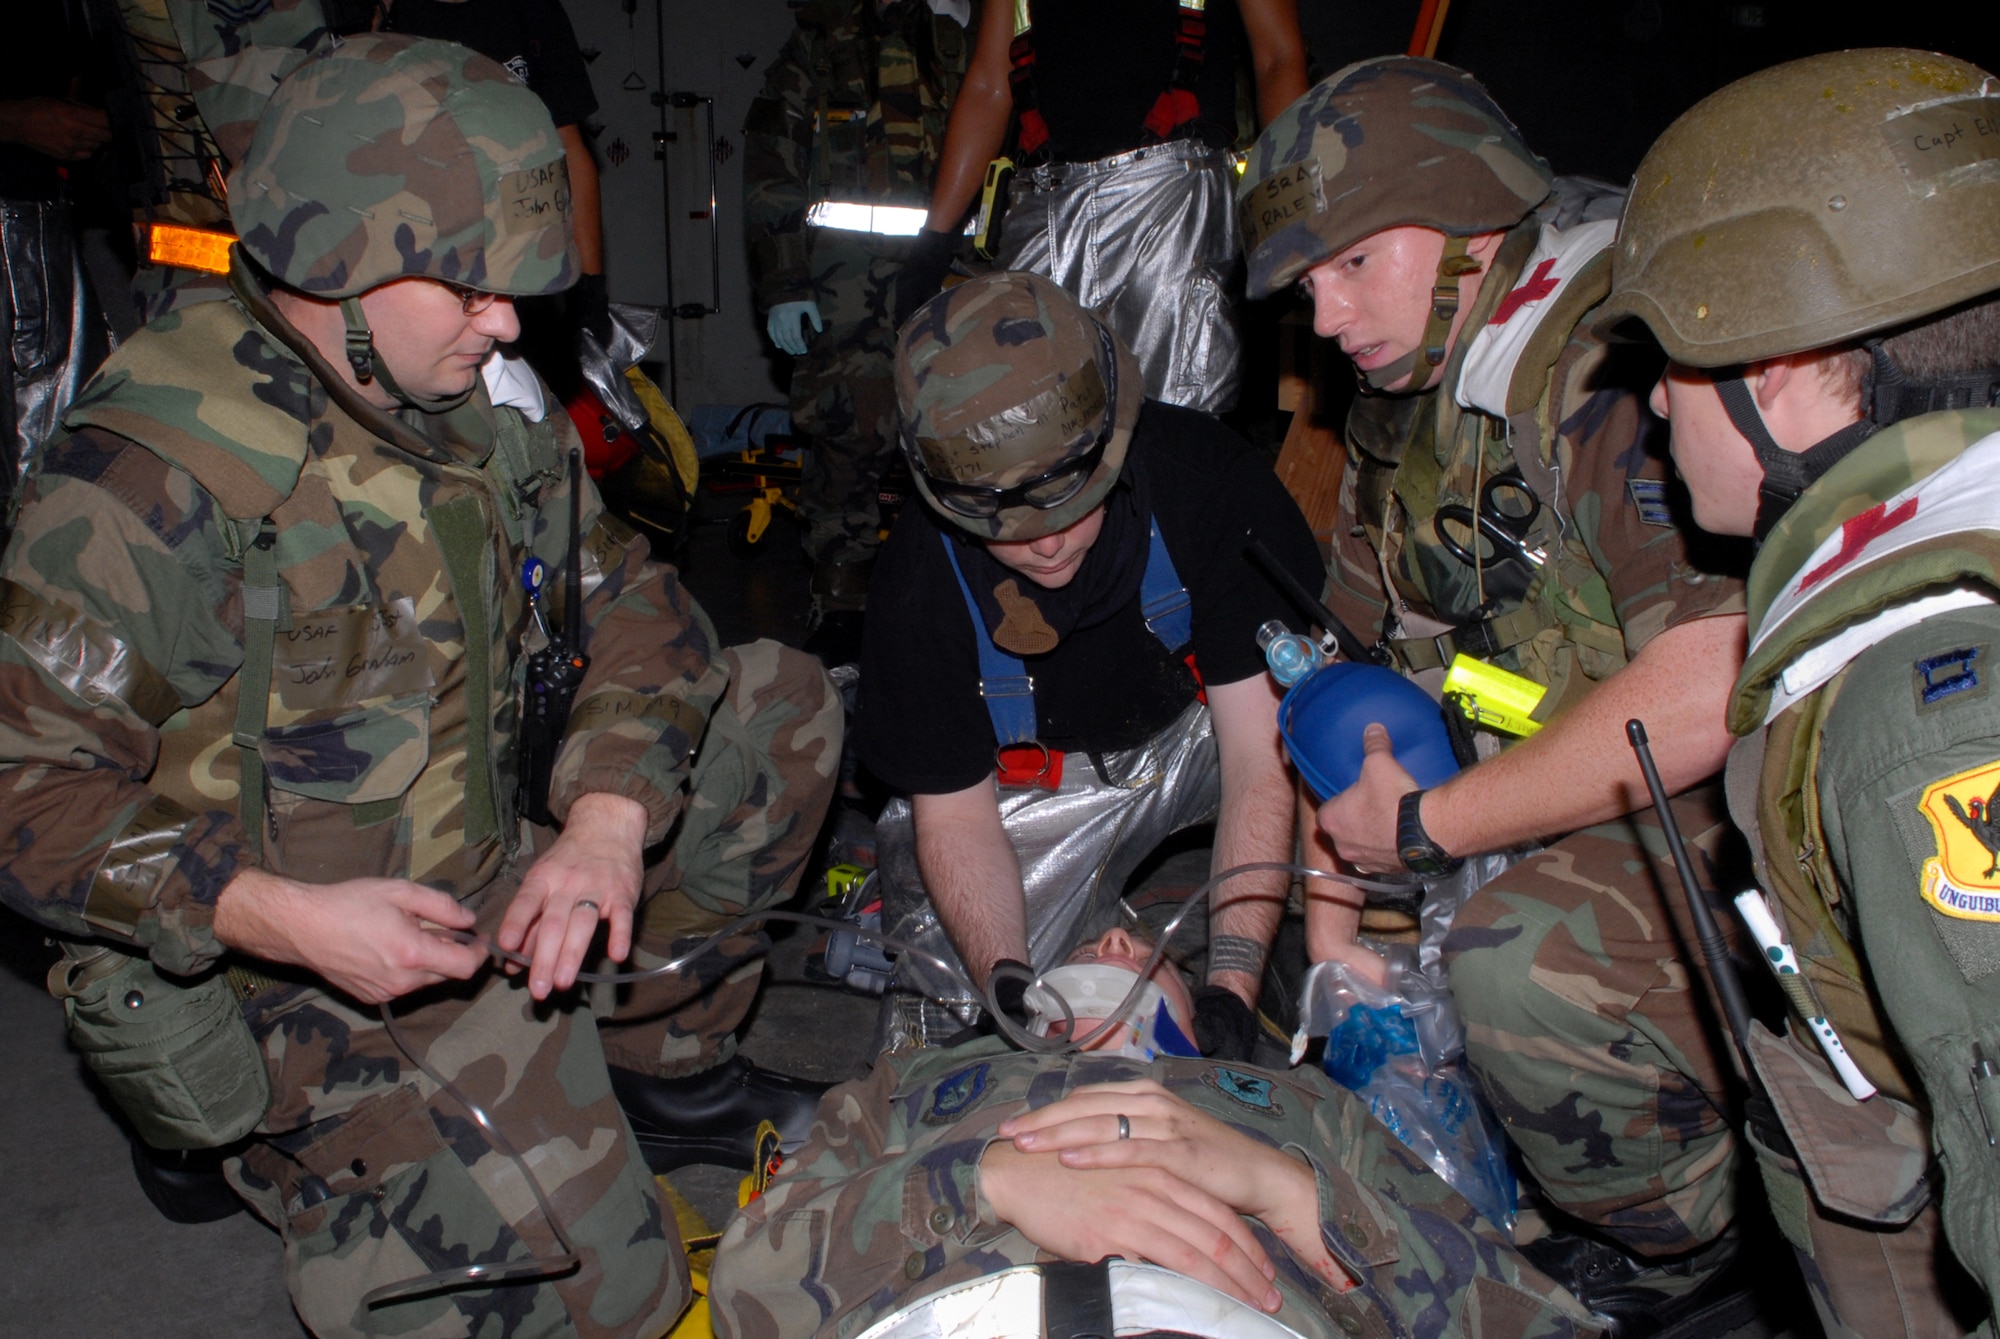 Airmen assigned to 18th Medical Operations Squadron and 18th Civil Engineer Group thoroughly assess Senior Airman James Wells, 718th Aircraft Maintenance Squadron, after pulling him from under debris during a structural and fire scenario in Bldg. 798, during Local Operational Readiness Exercise Beverly High 08-3 at Kadena Air Base, Japan, Jan. 9, 2007. The 18th Wing conducted the exercise from Jan. 7 to 11 to test the wing's ability to respond in contingency situations. 
(U.S. Air Force photo/Staff Sgt. Chrissy FitzGerald)
